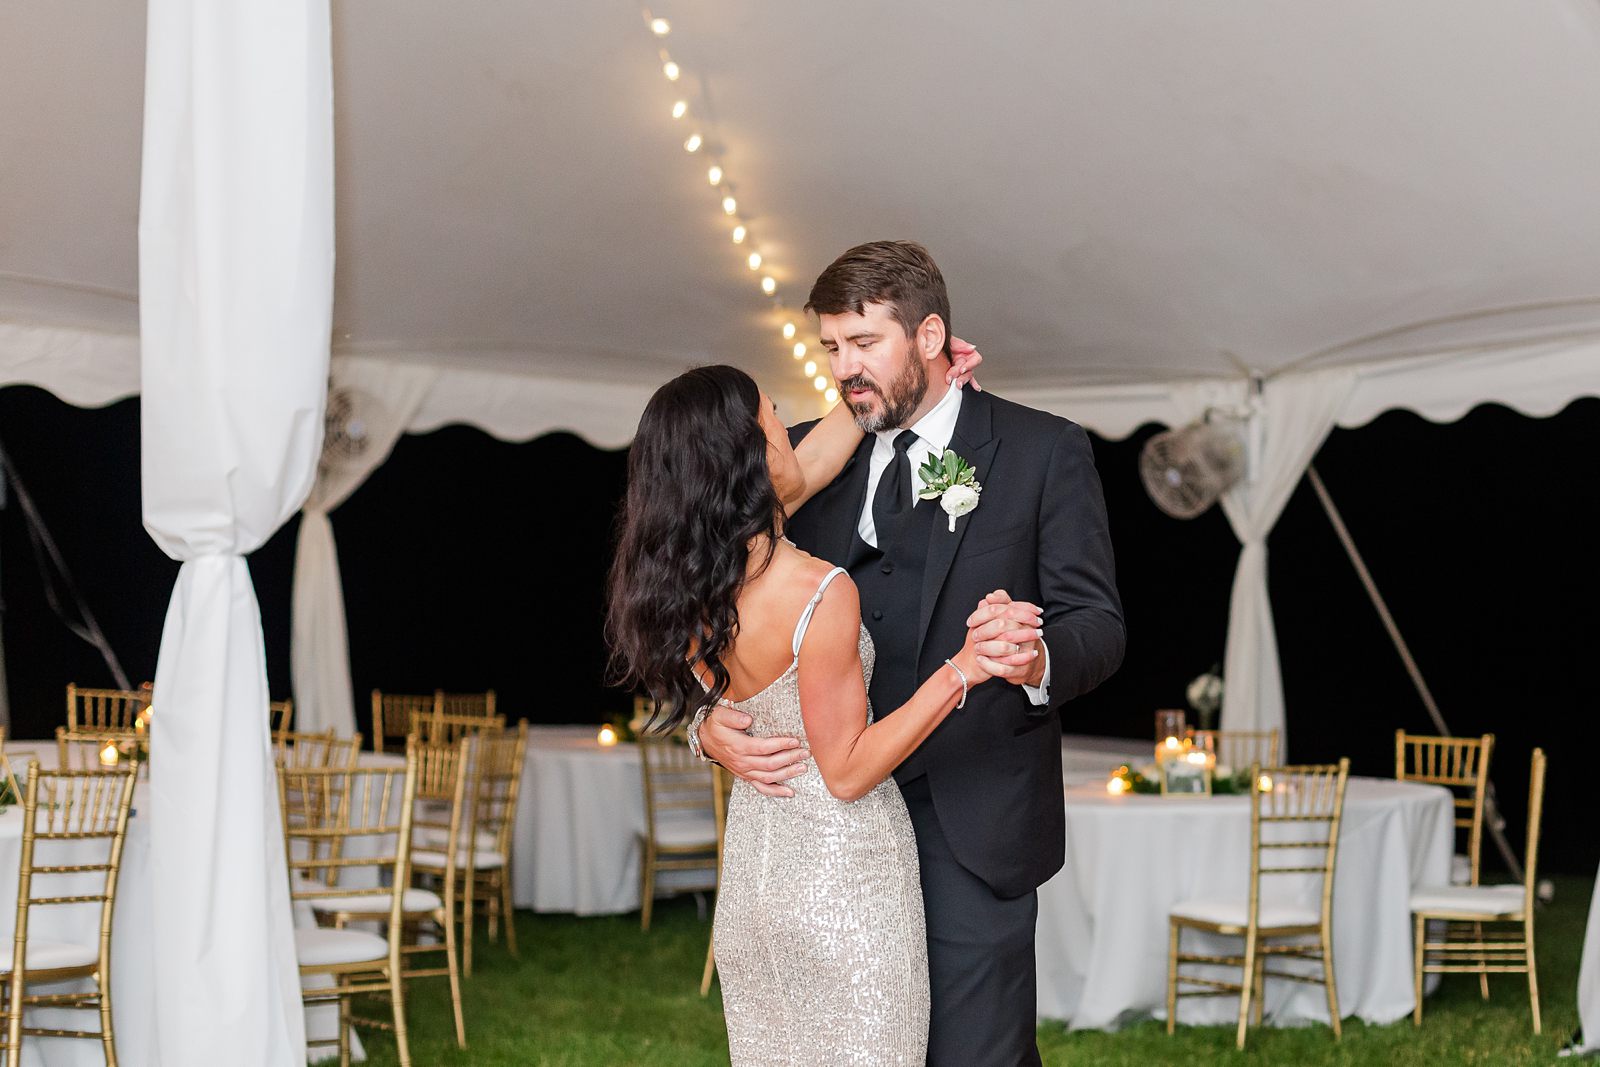 Bride and Groom Last Dance at Wedding Reception by Kailey Brianne Photography 